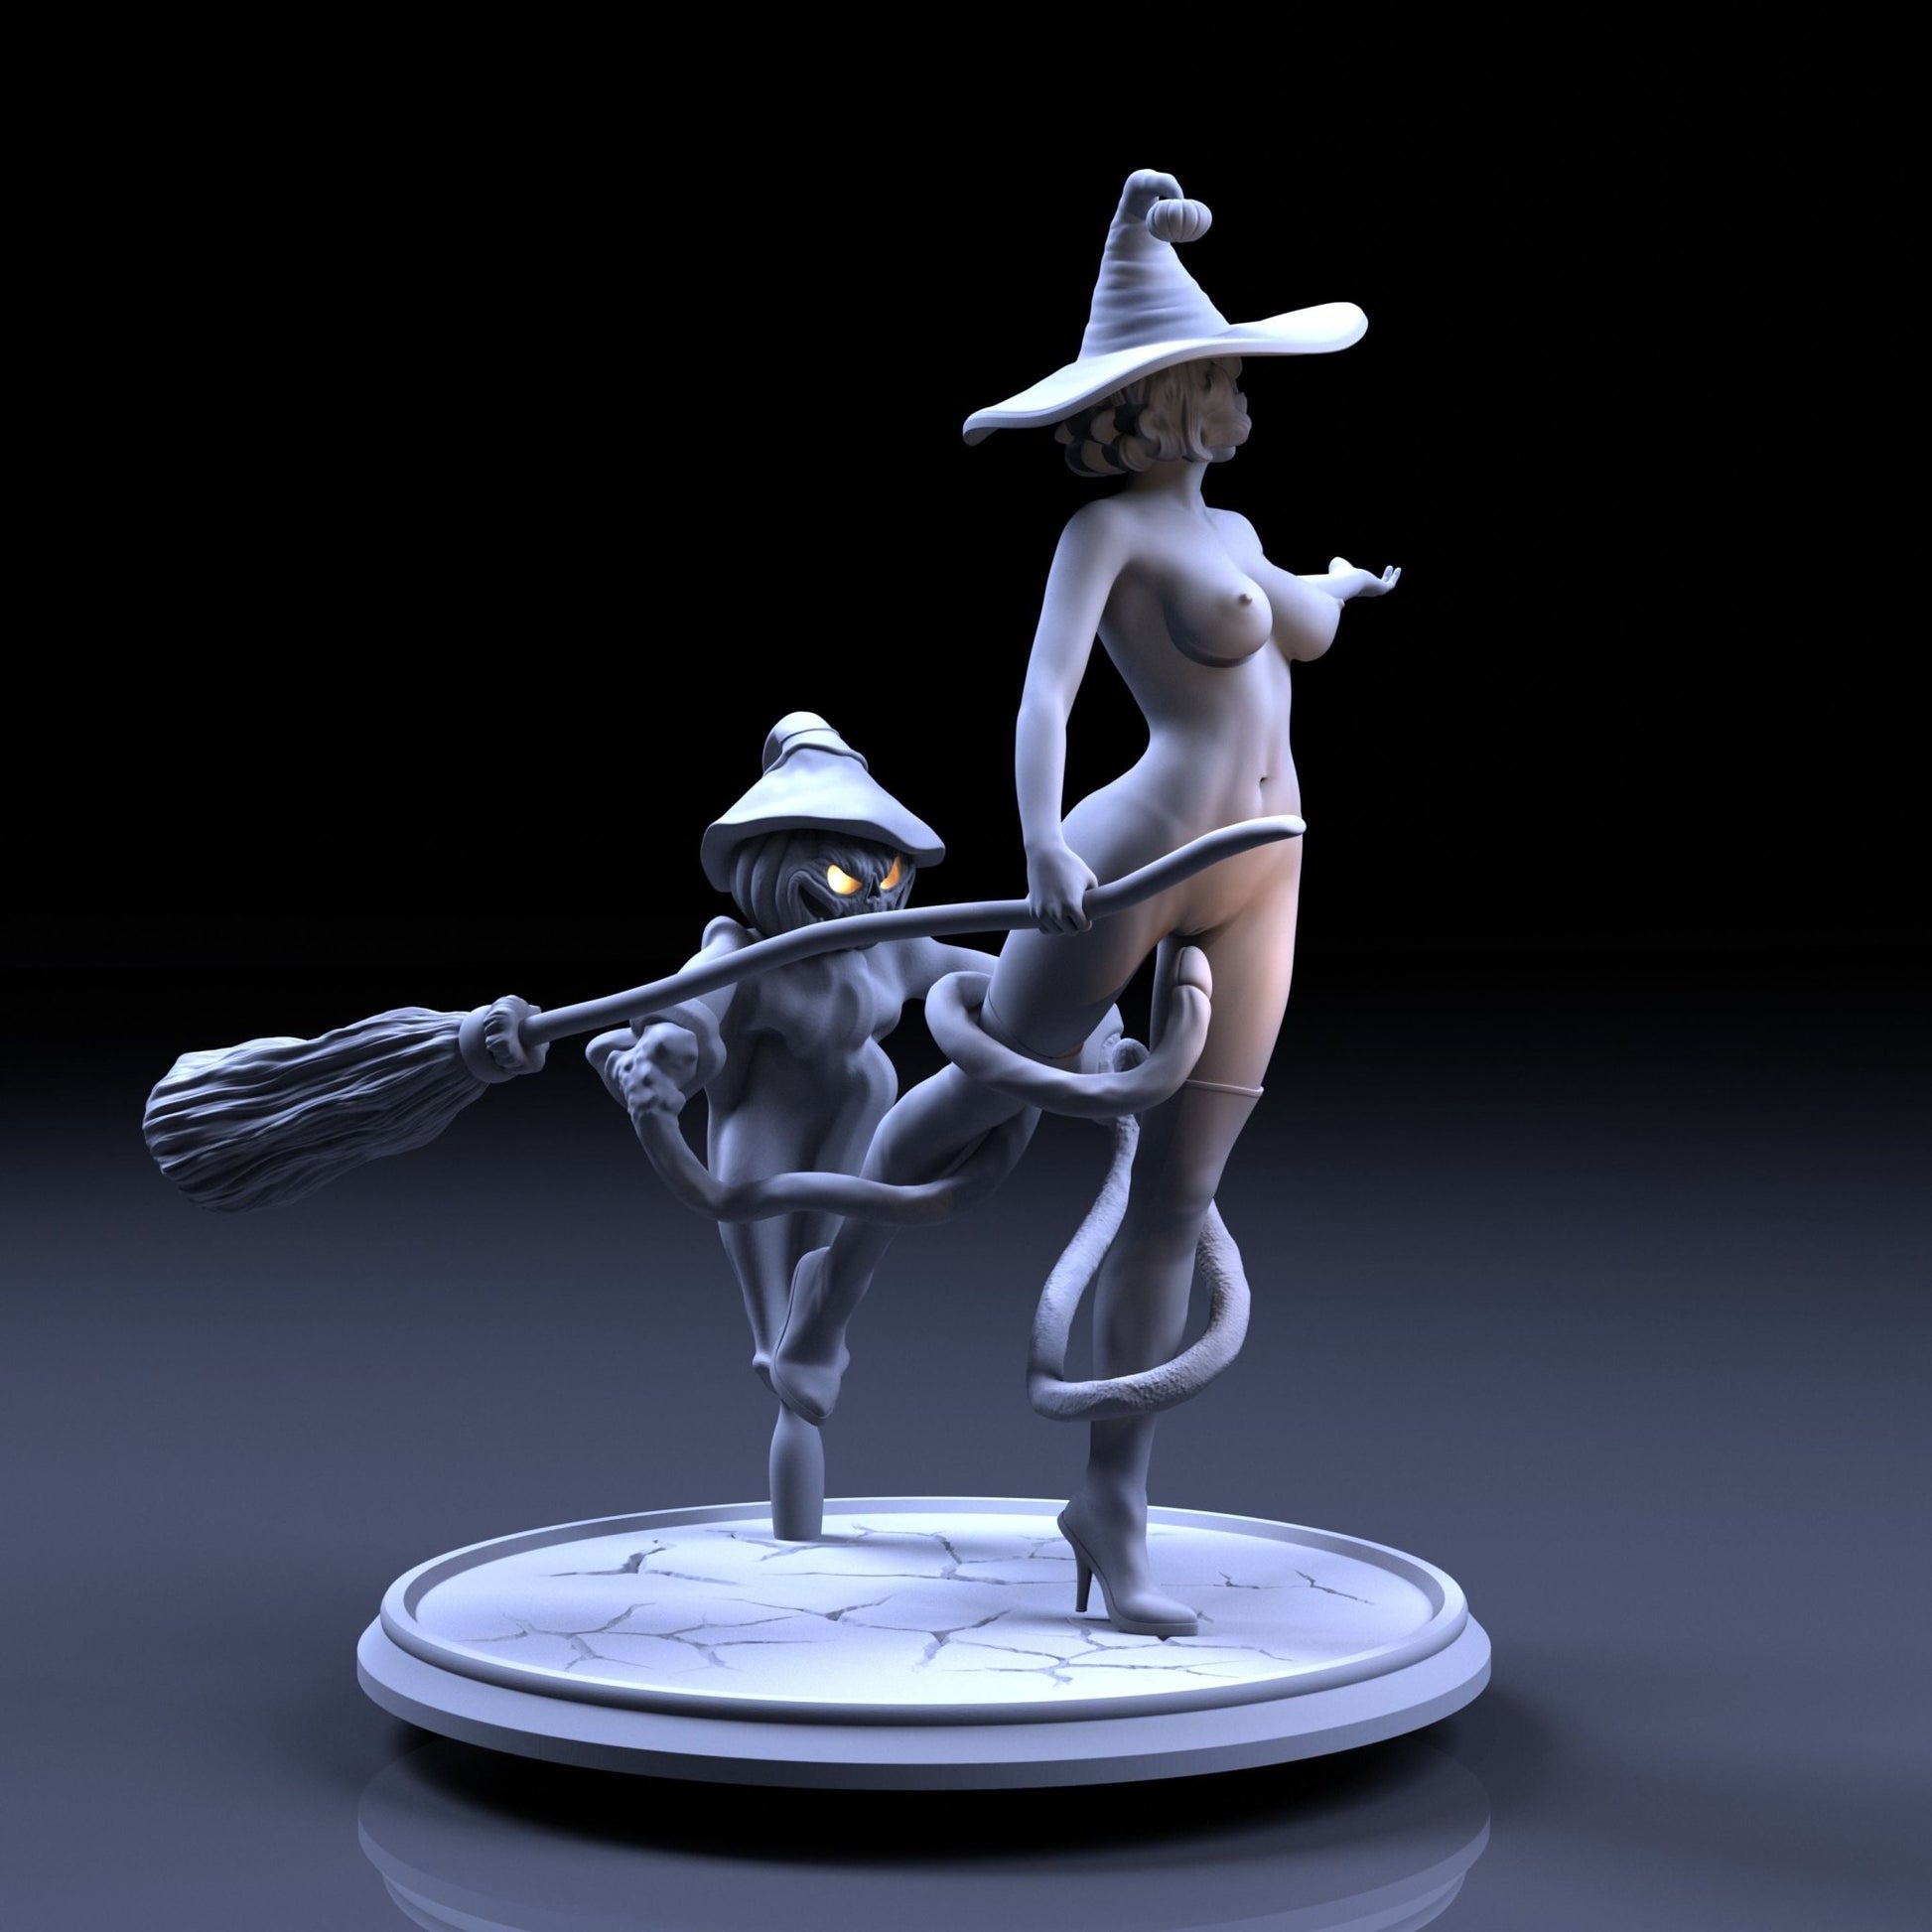 Witches fun on Halloween | 3D Printed | Funart | Unpainted | NSFW | Figurine